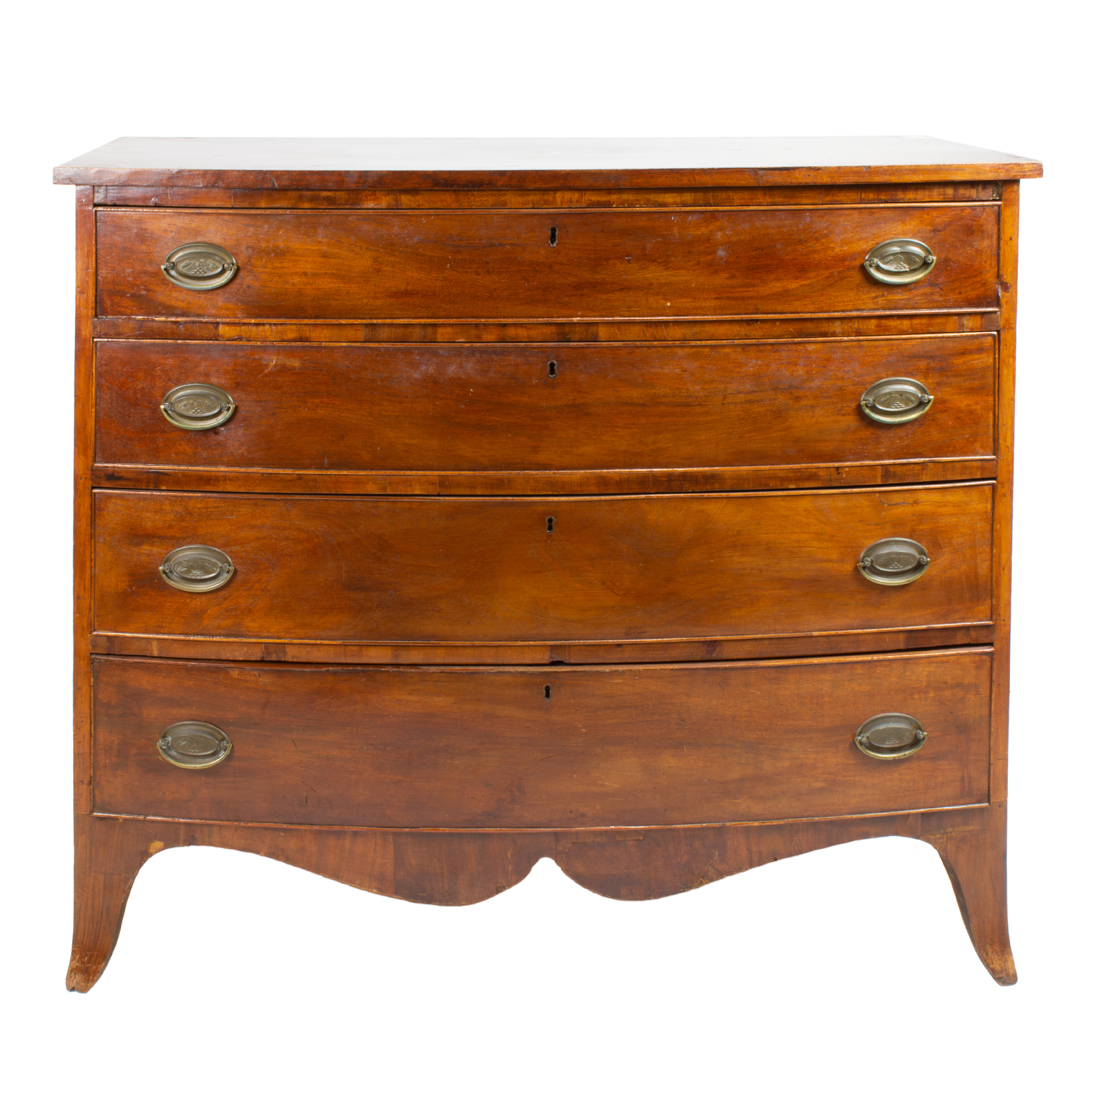 A FEDERAL MAHOGANY BOW FRONT CHEST 3a16c0